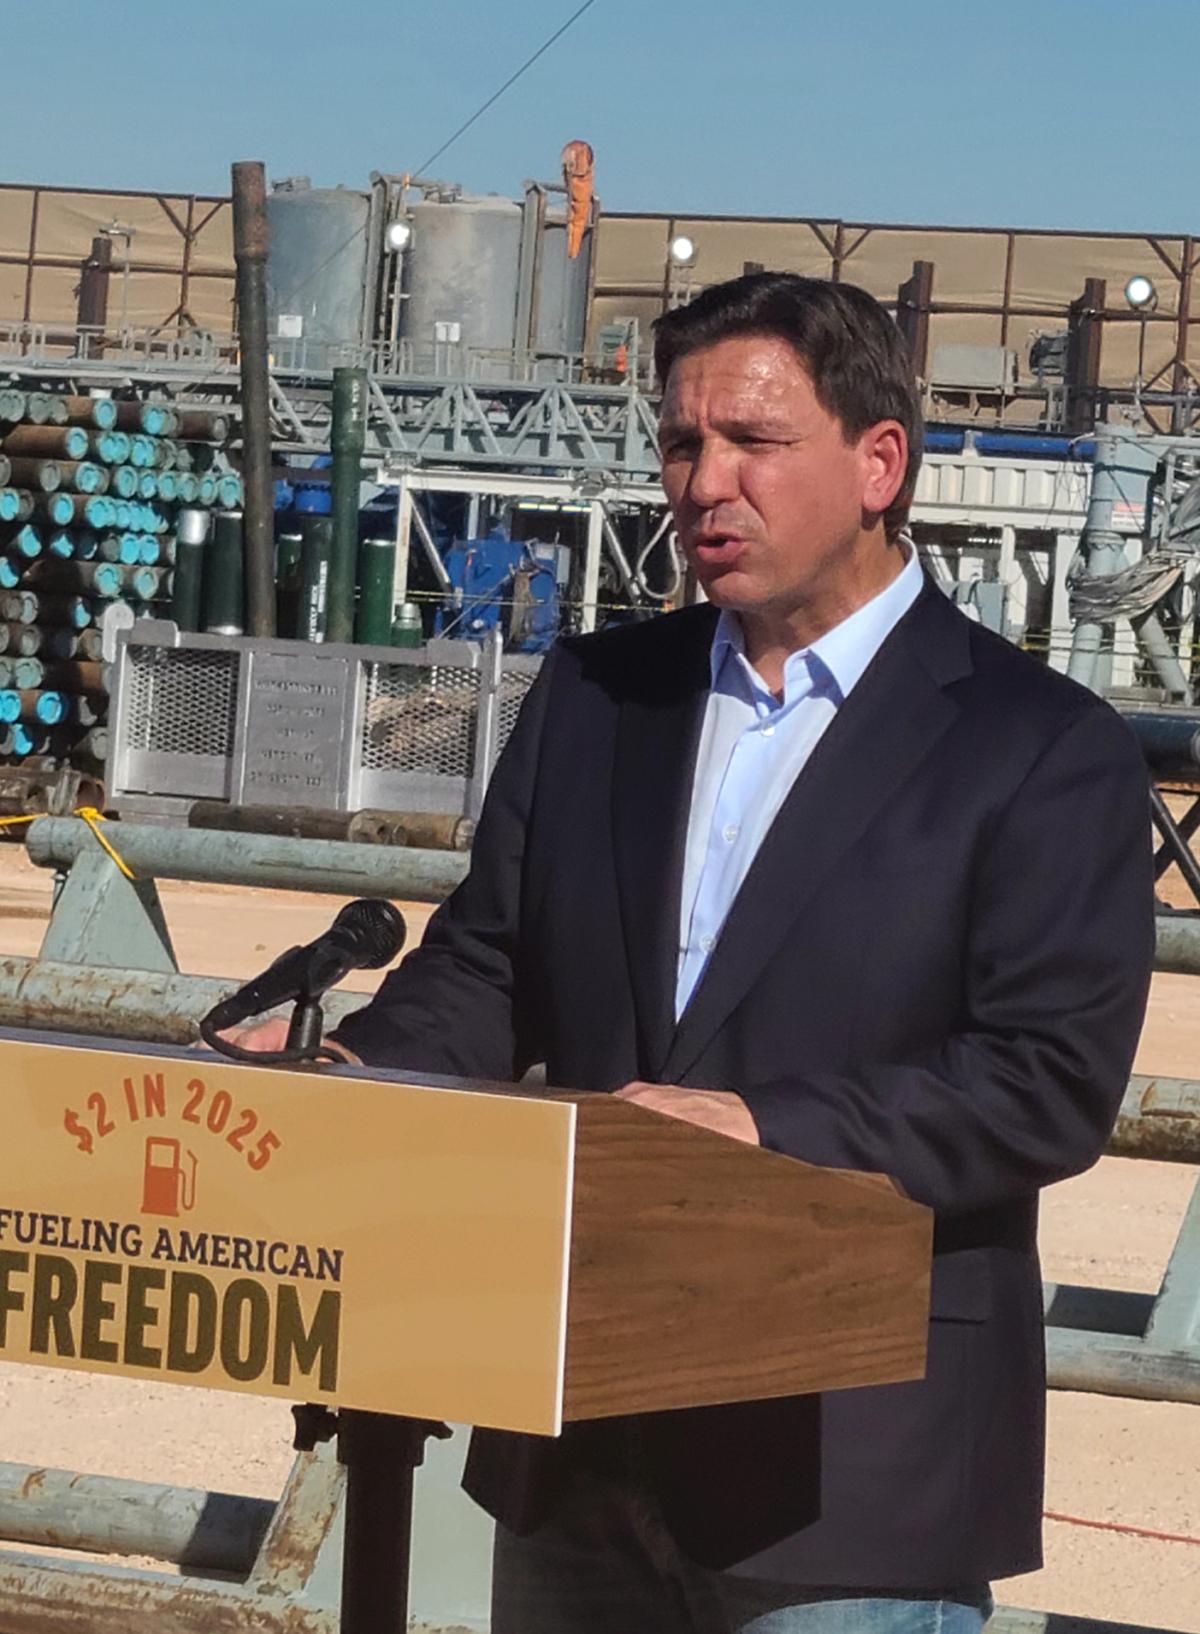 Ron DeSantis said restoring U.S. oil and gas production and exports could help reduce emissions and poverty in the developing world, and cut the oil profits Russia is using to fund its invasion of Ukraine. (Dan M. Berger/The Epoch Times)